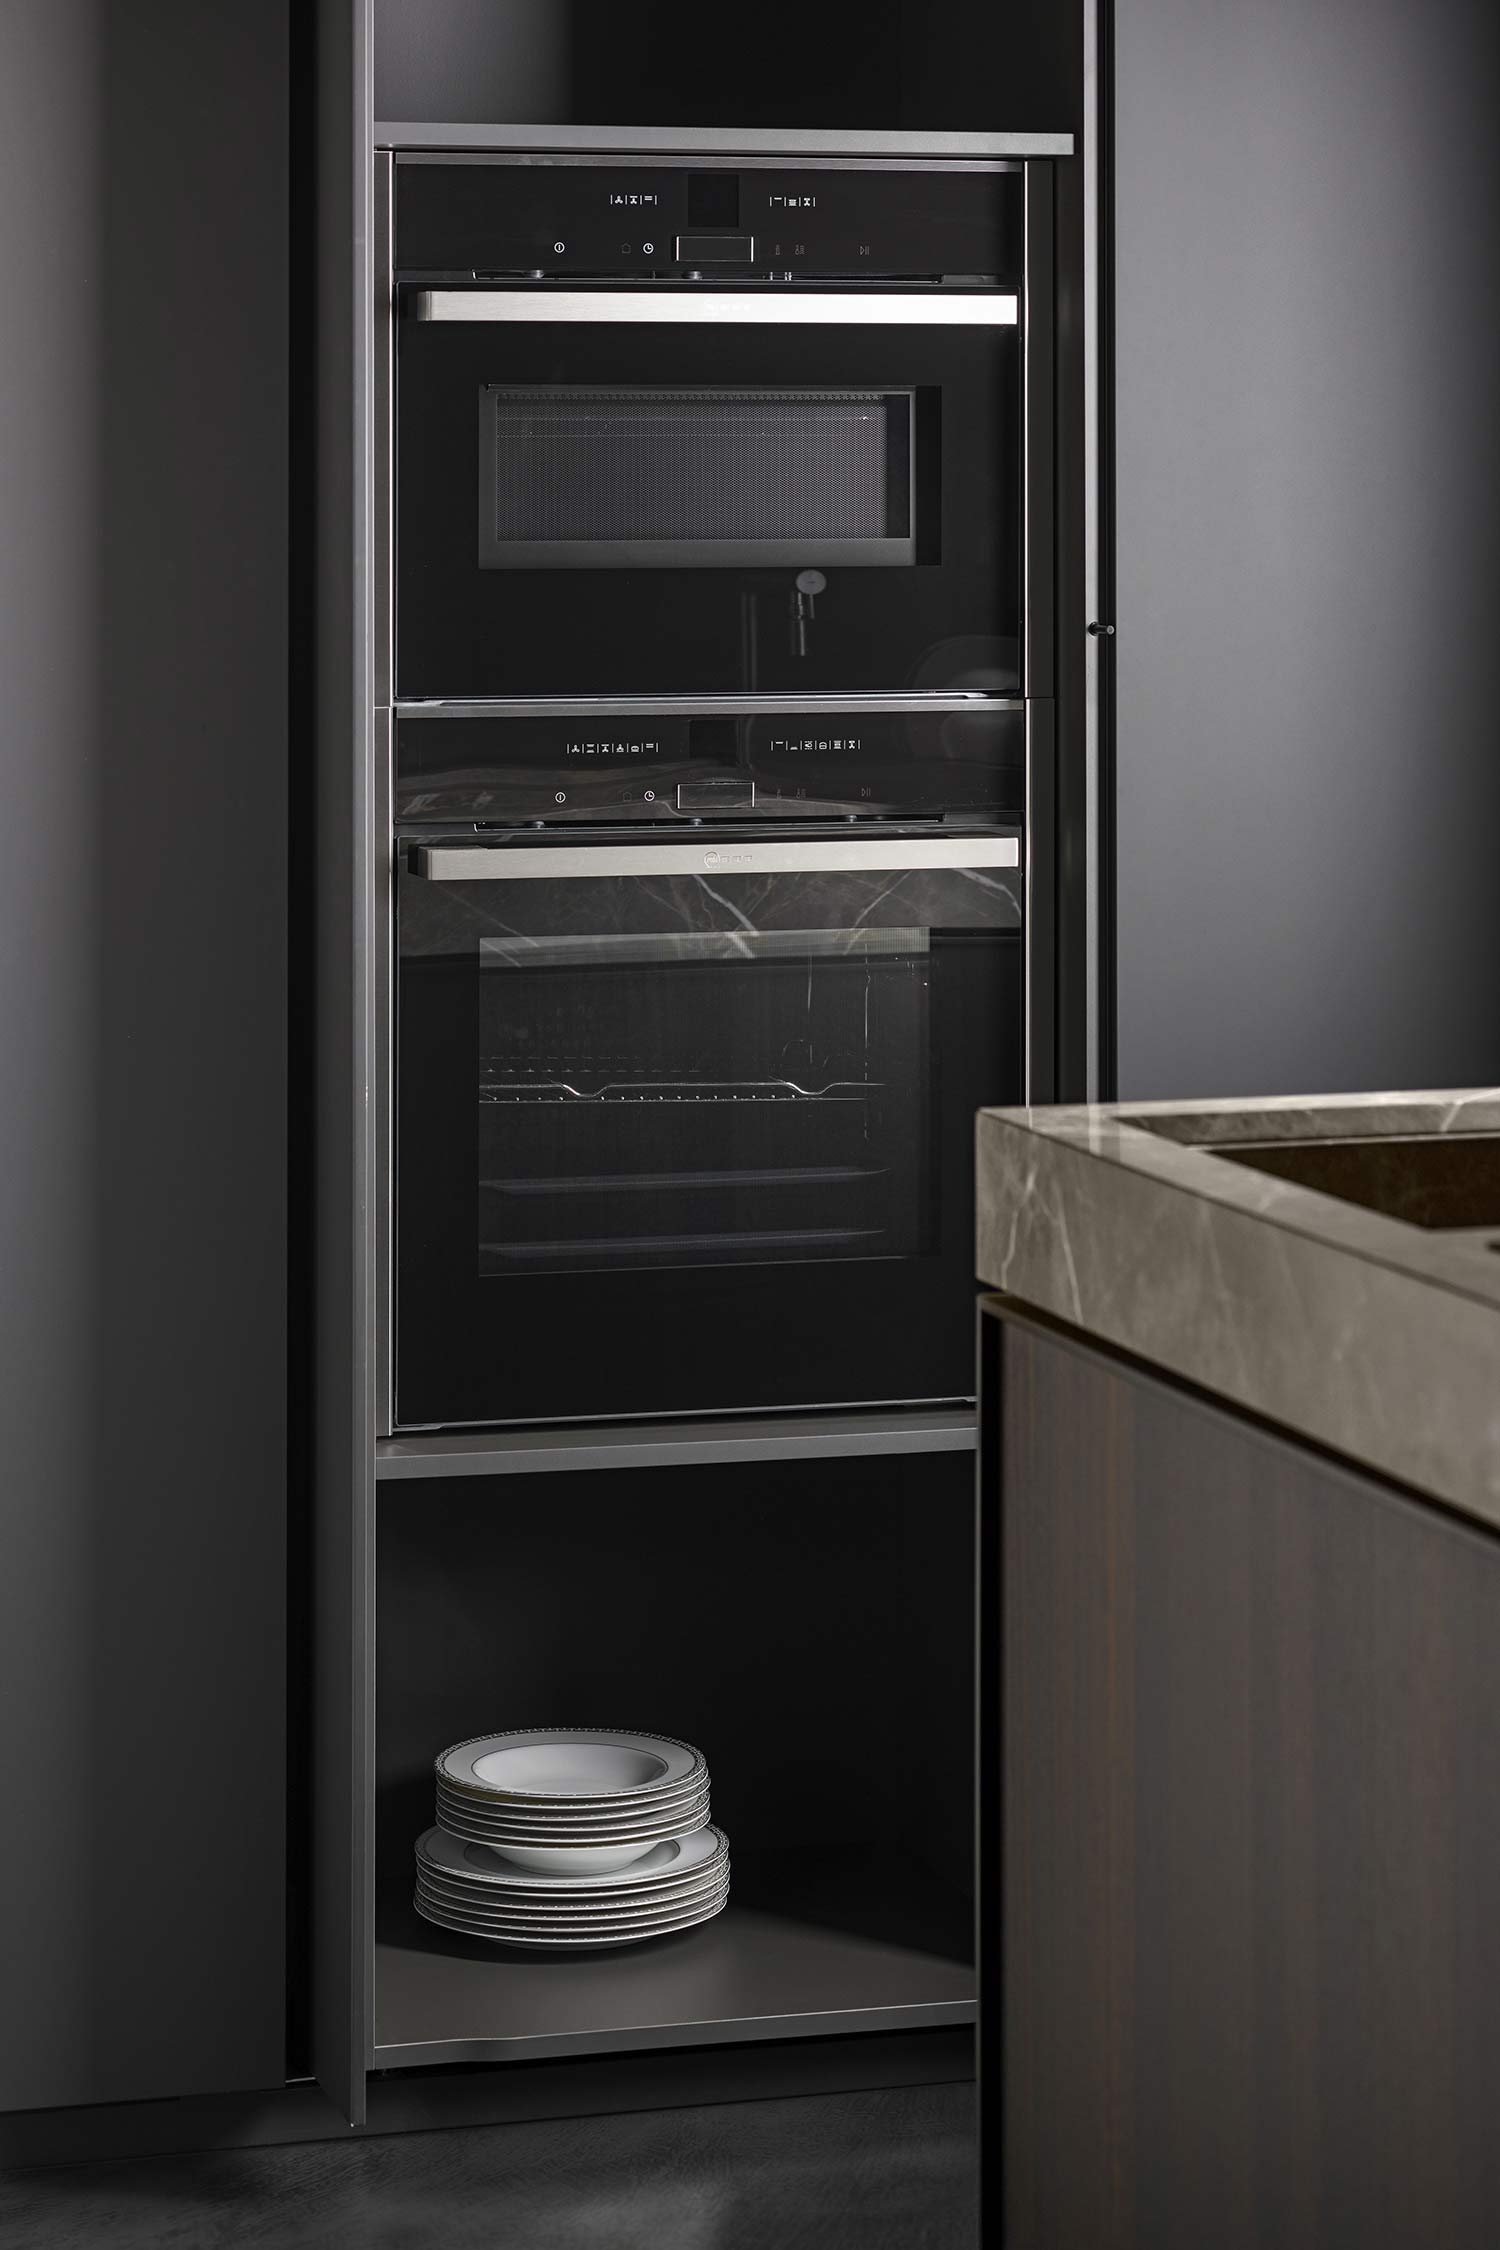 Luxury kitchen appliances integrated into the kitchen wall units.